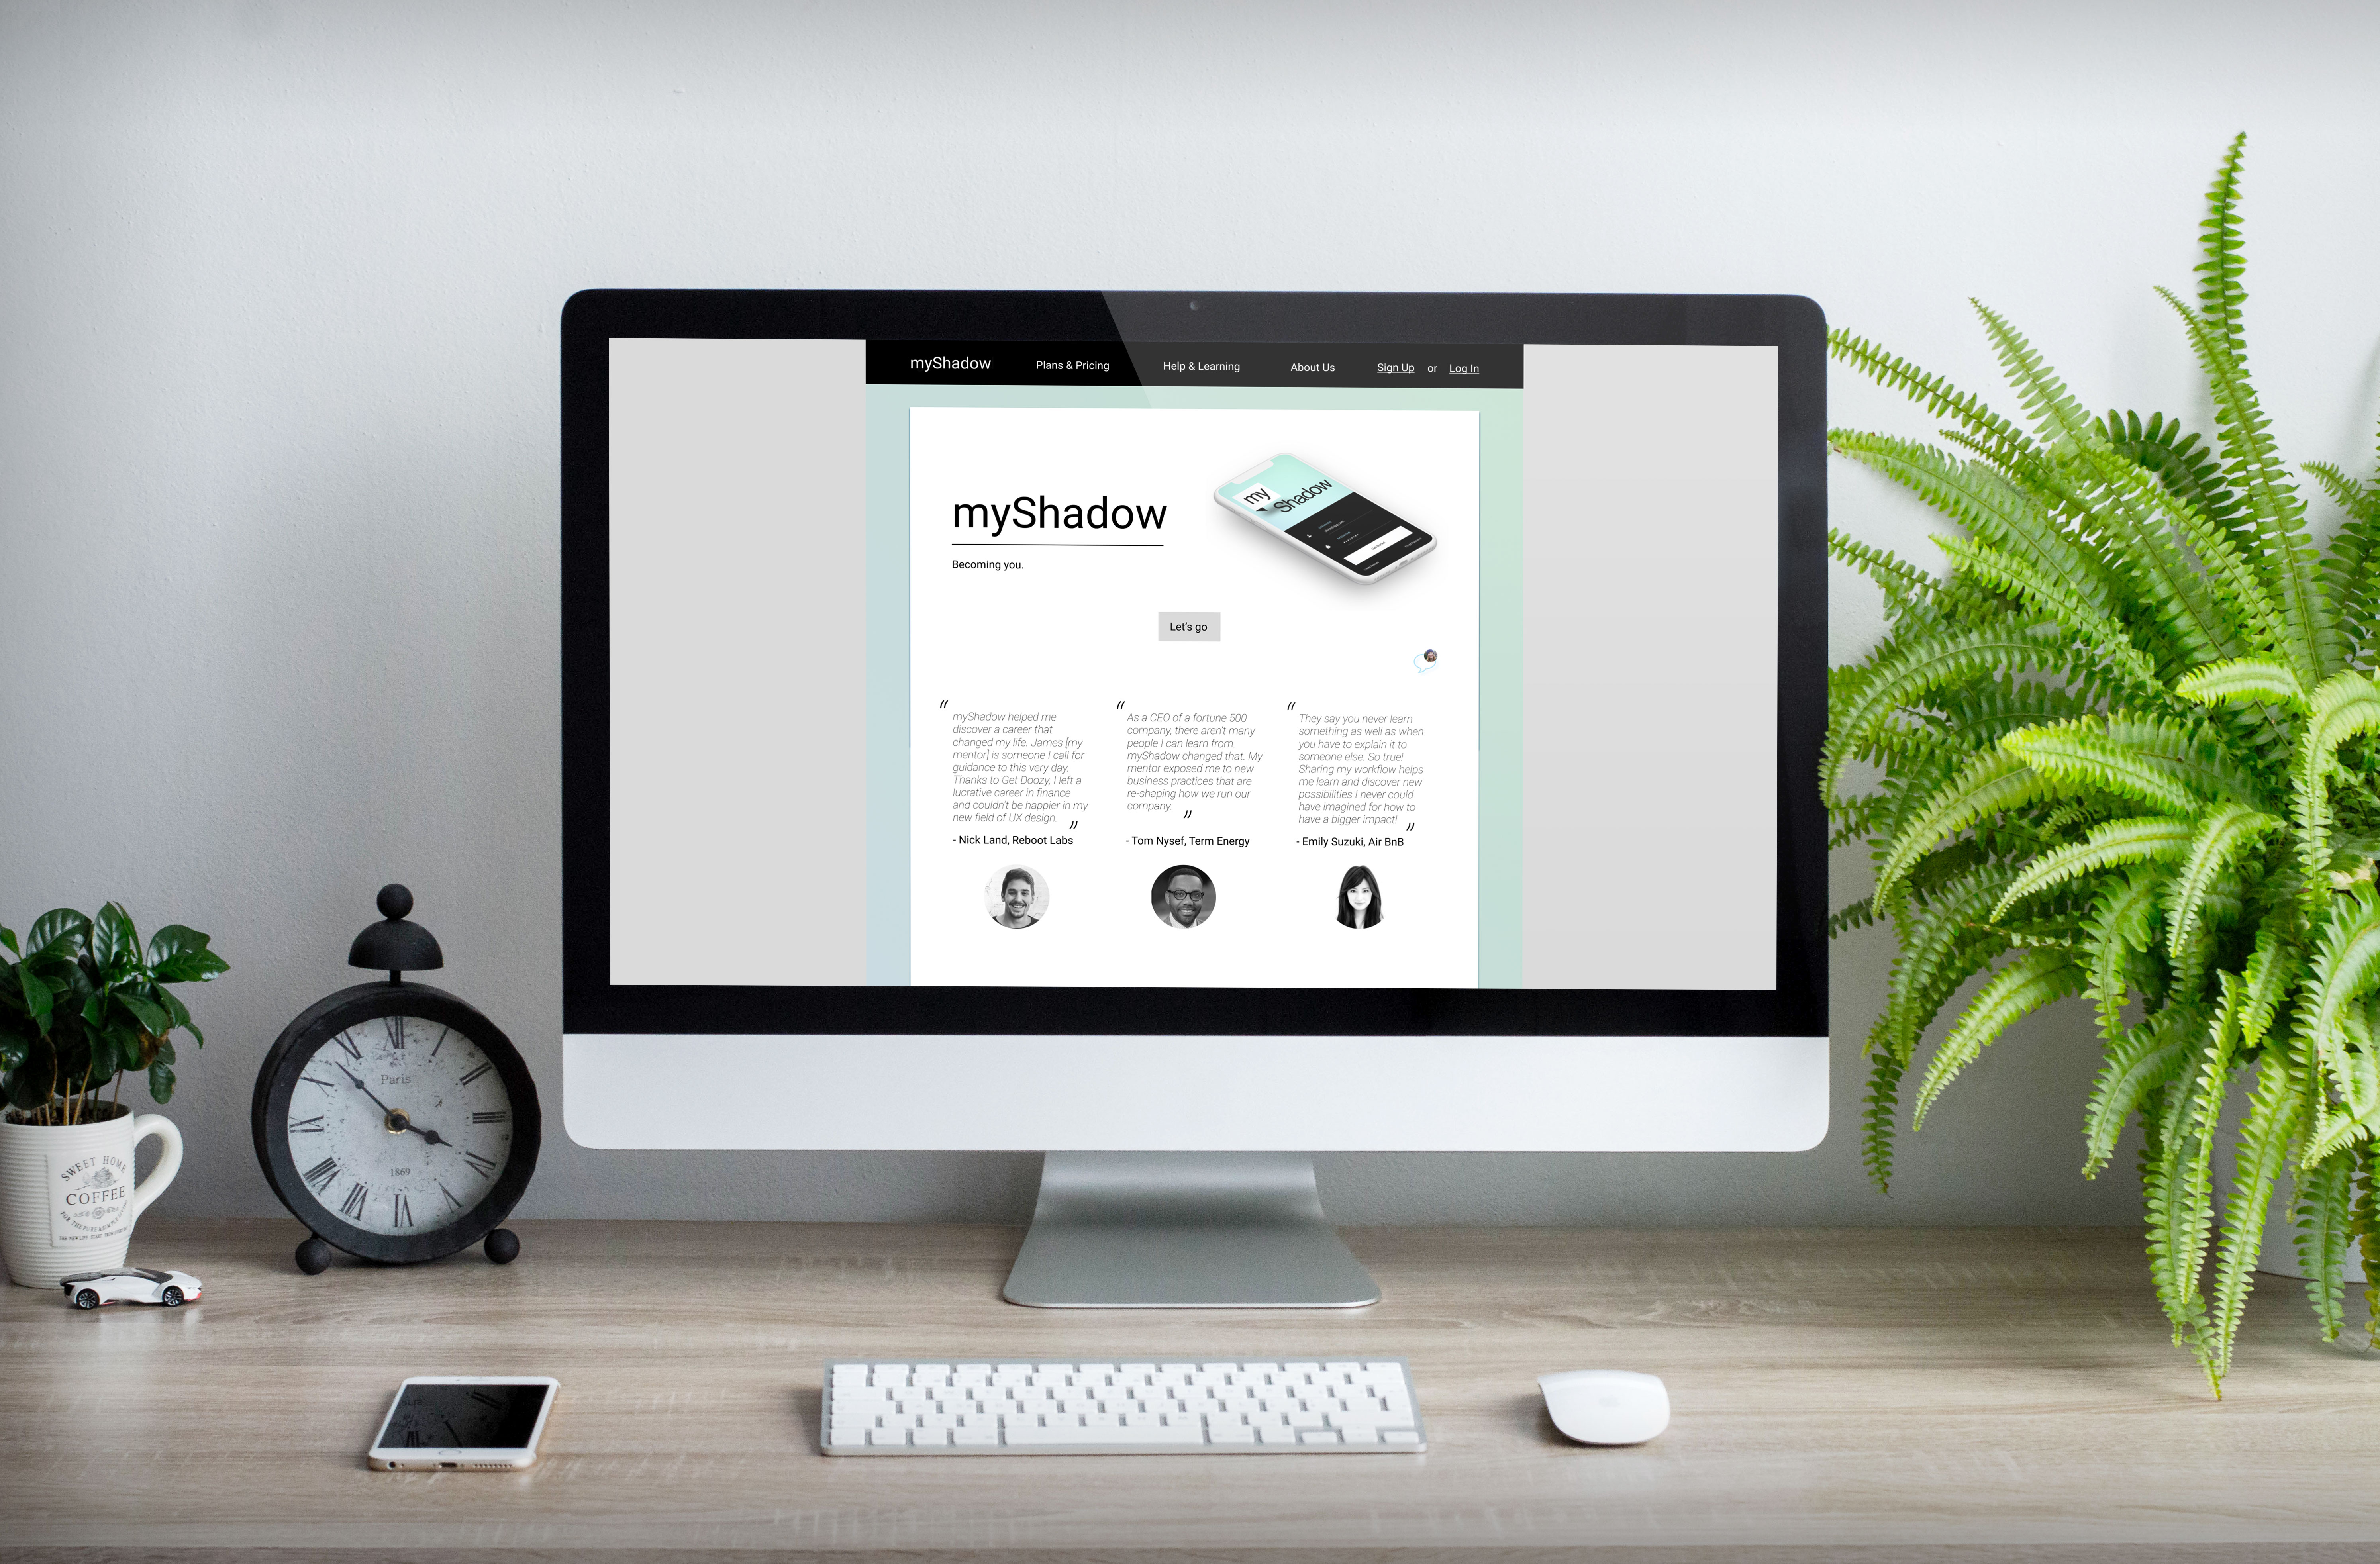 a mockup of an apple imac product with a montage of our myshadow homepage on the screen